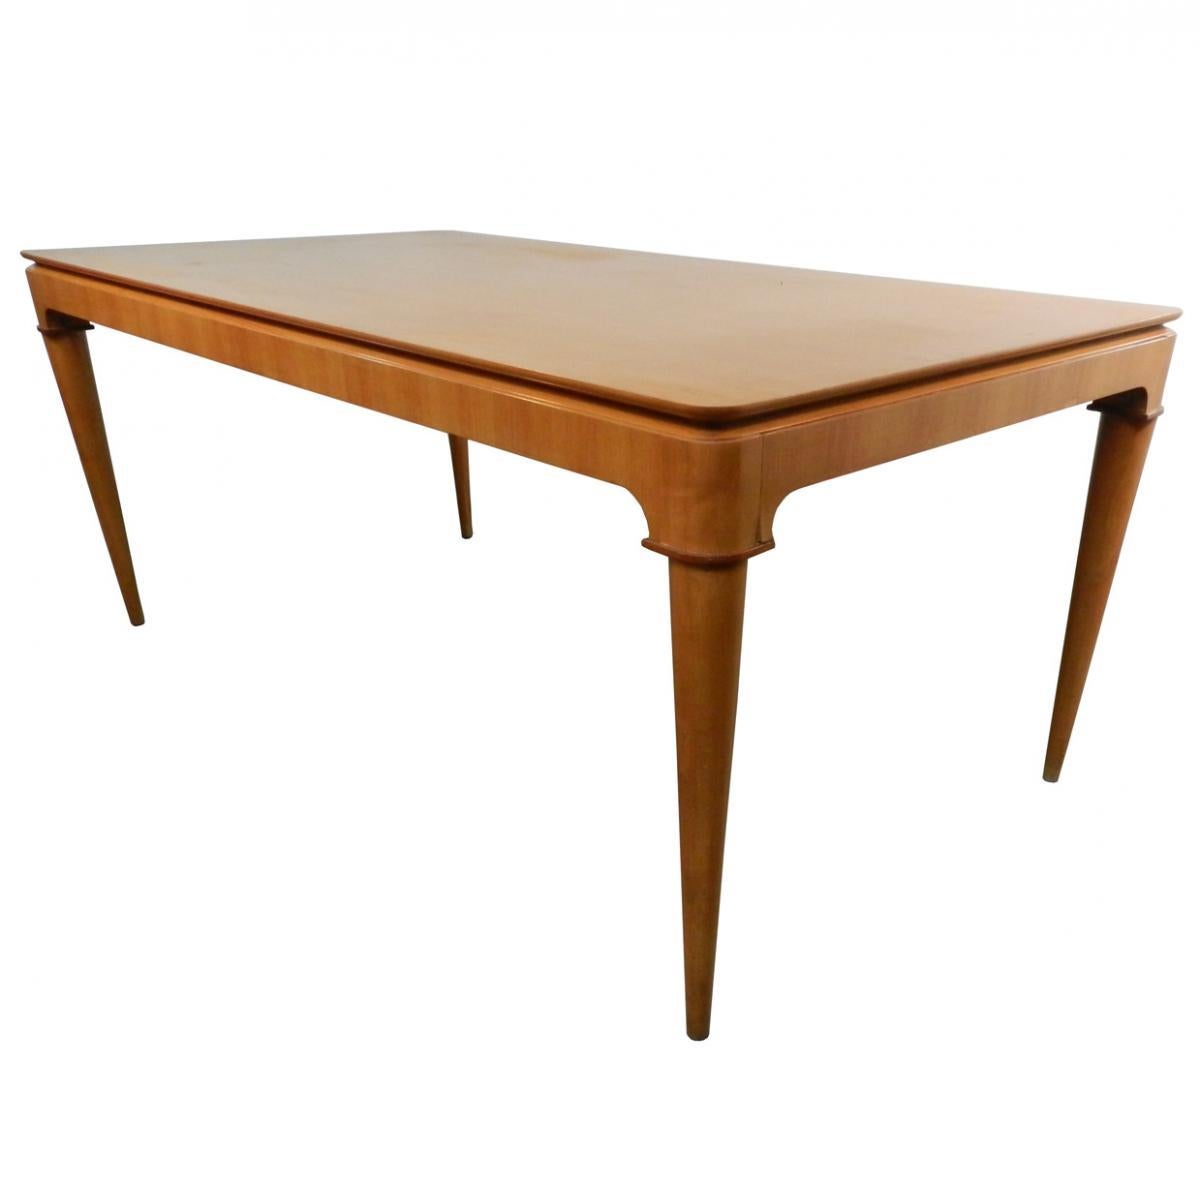 Italian Design circa 1950/1960 Cherry Table Stamped D.p
2 EXTENSIONS OF 60 CM EACH
lack of veneer on the extensions.